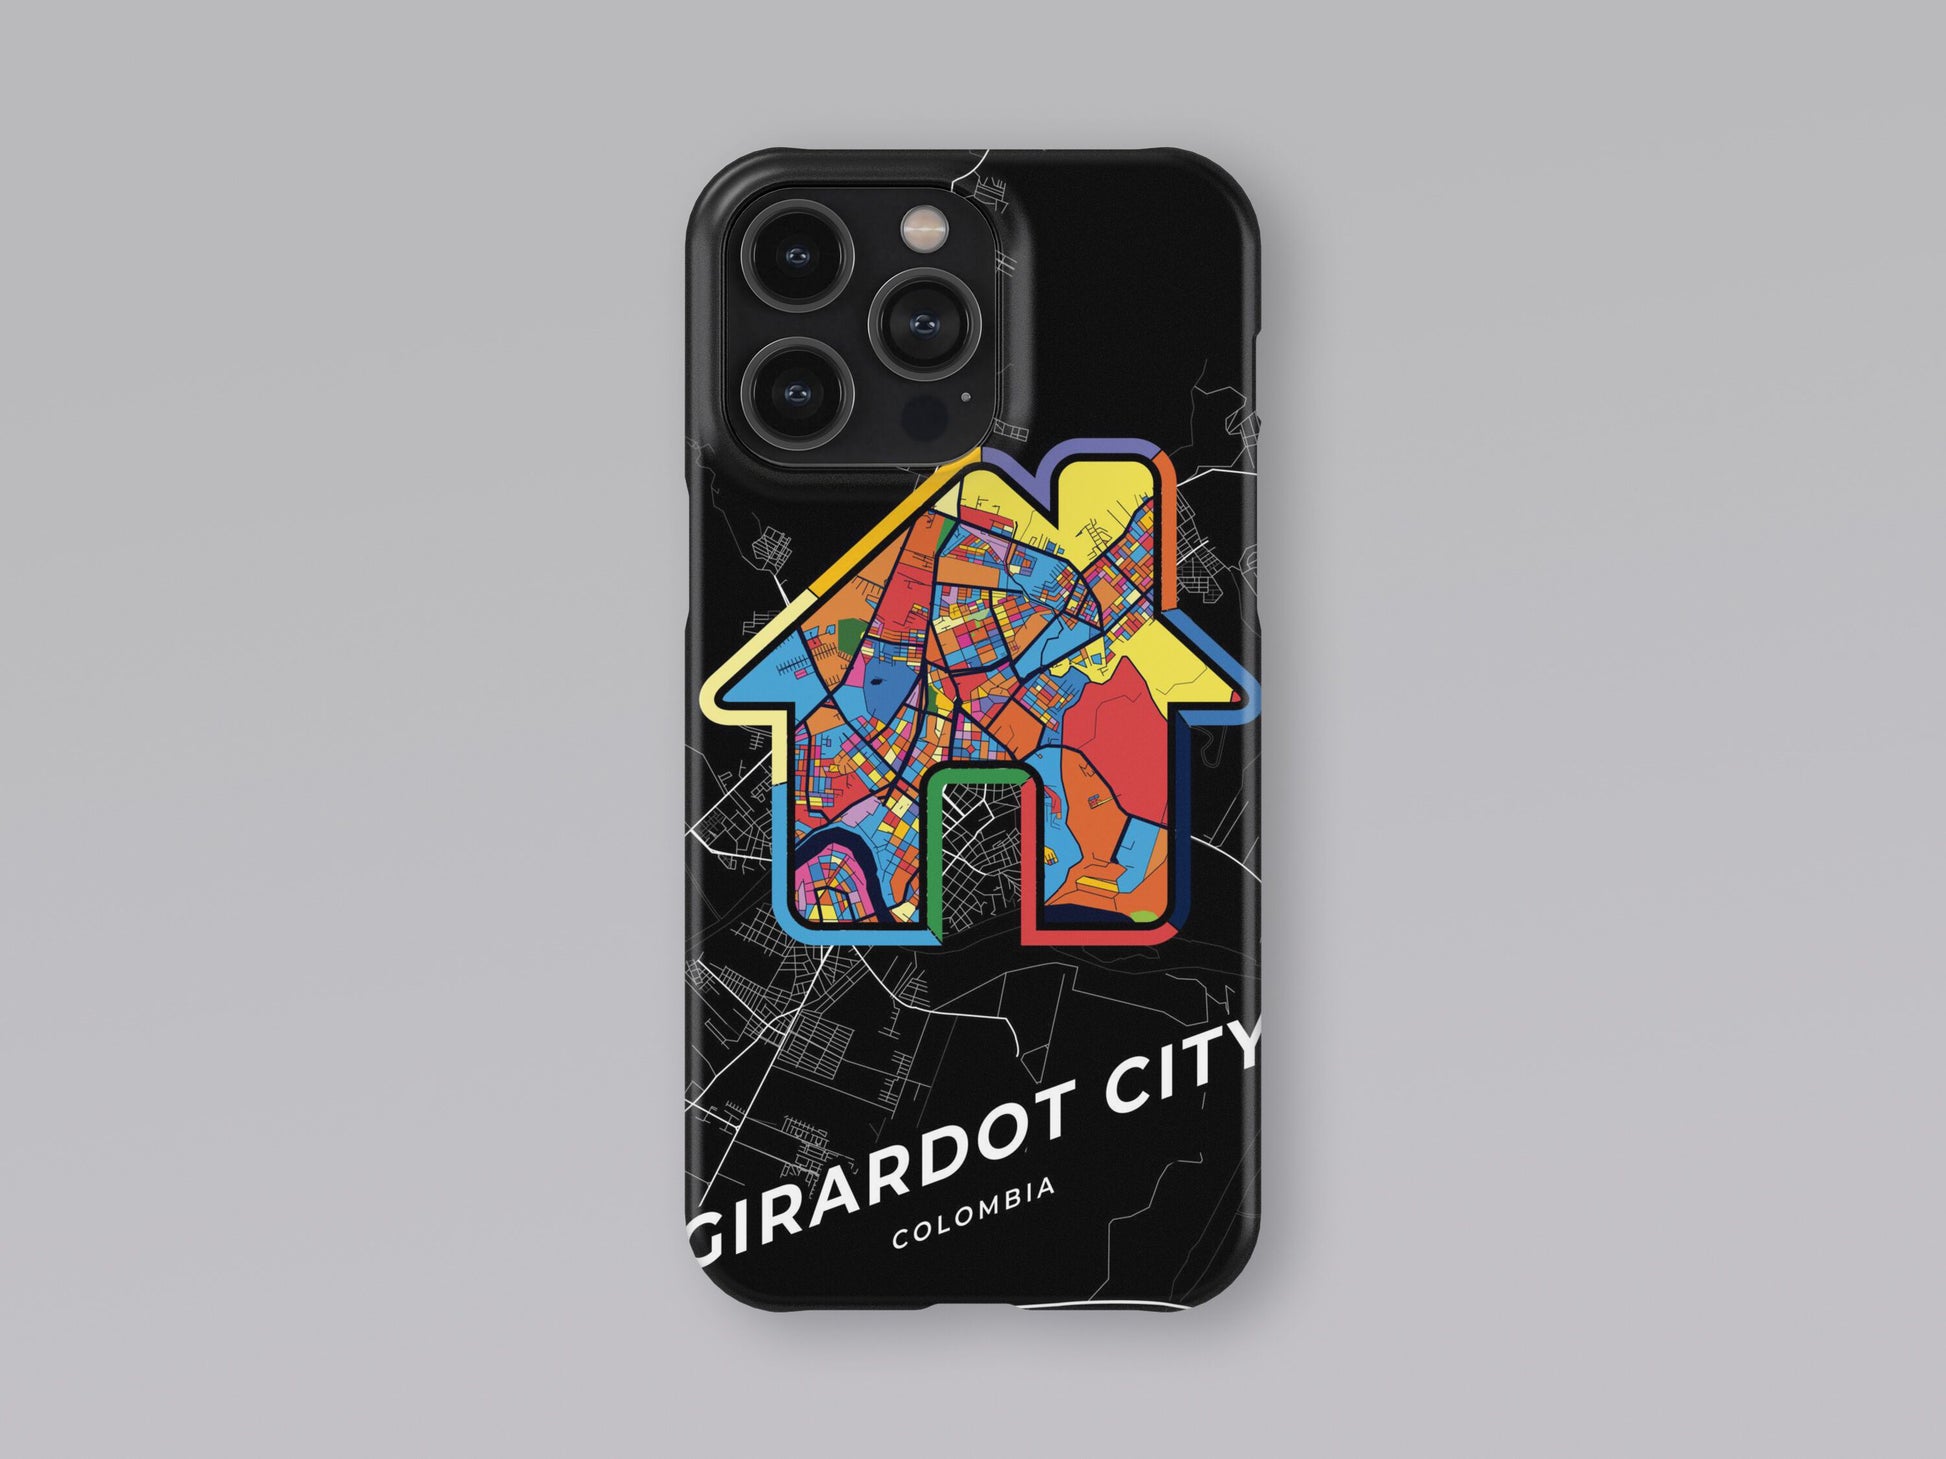 Girardot City Colombia slim phone case with colorful icon. Birthday, wedding or housewarming gift. Couple match cases. 3